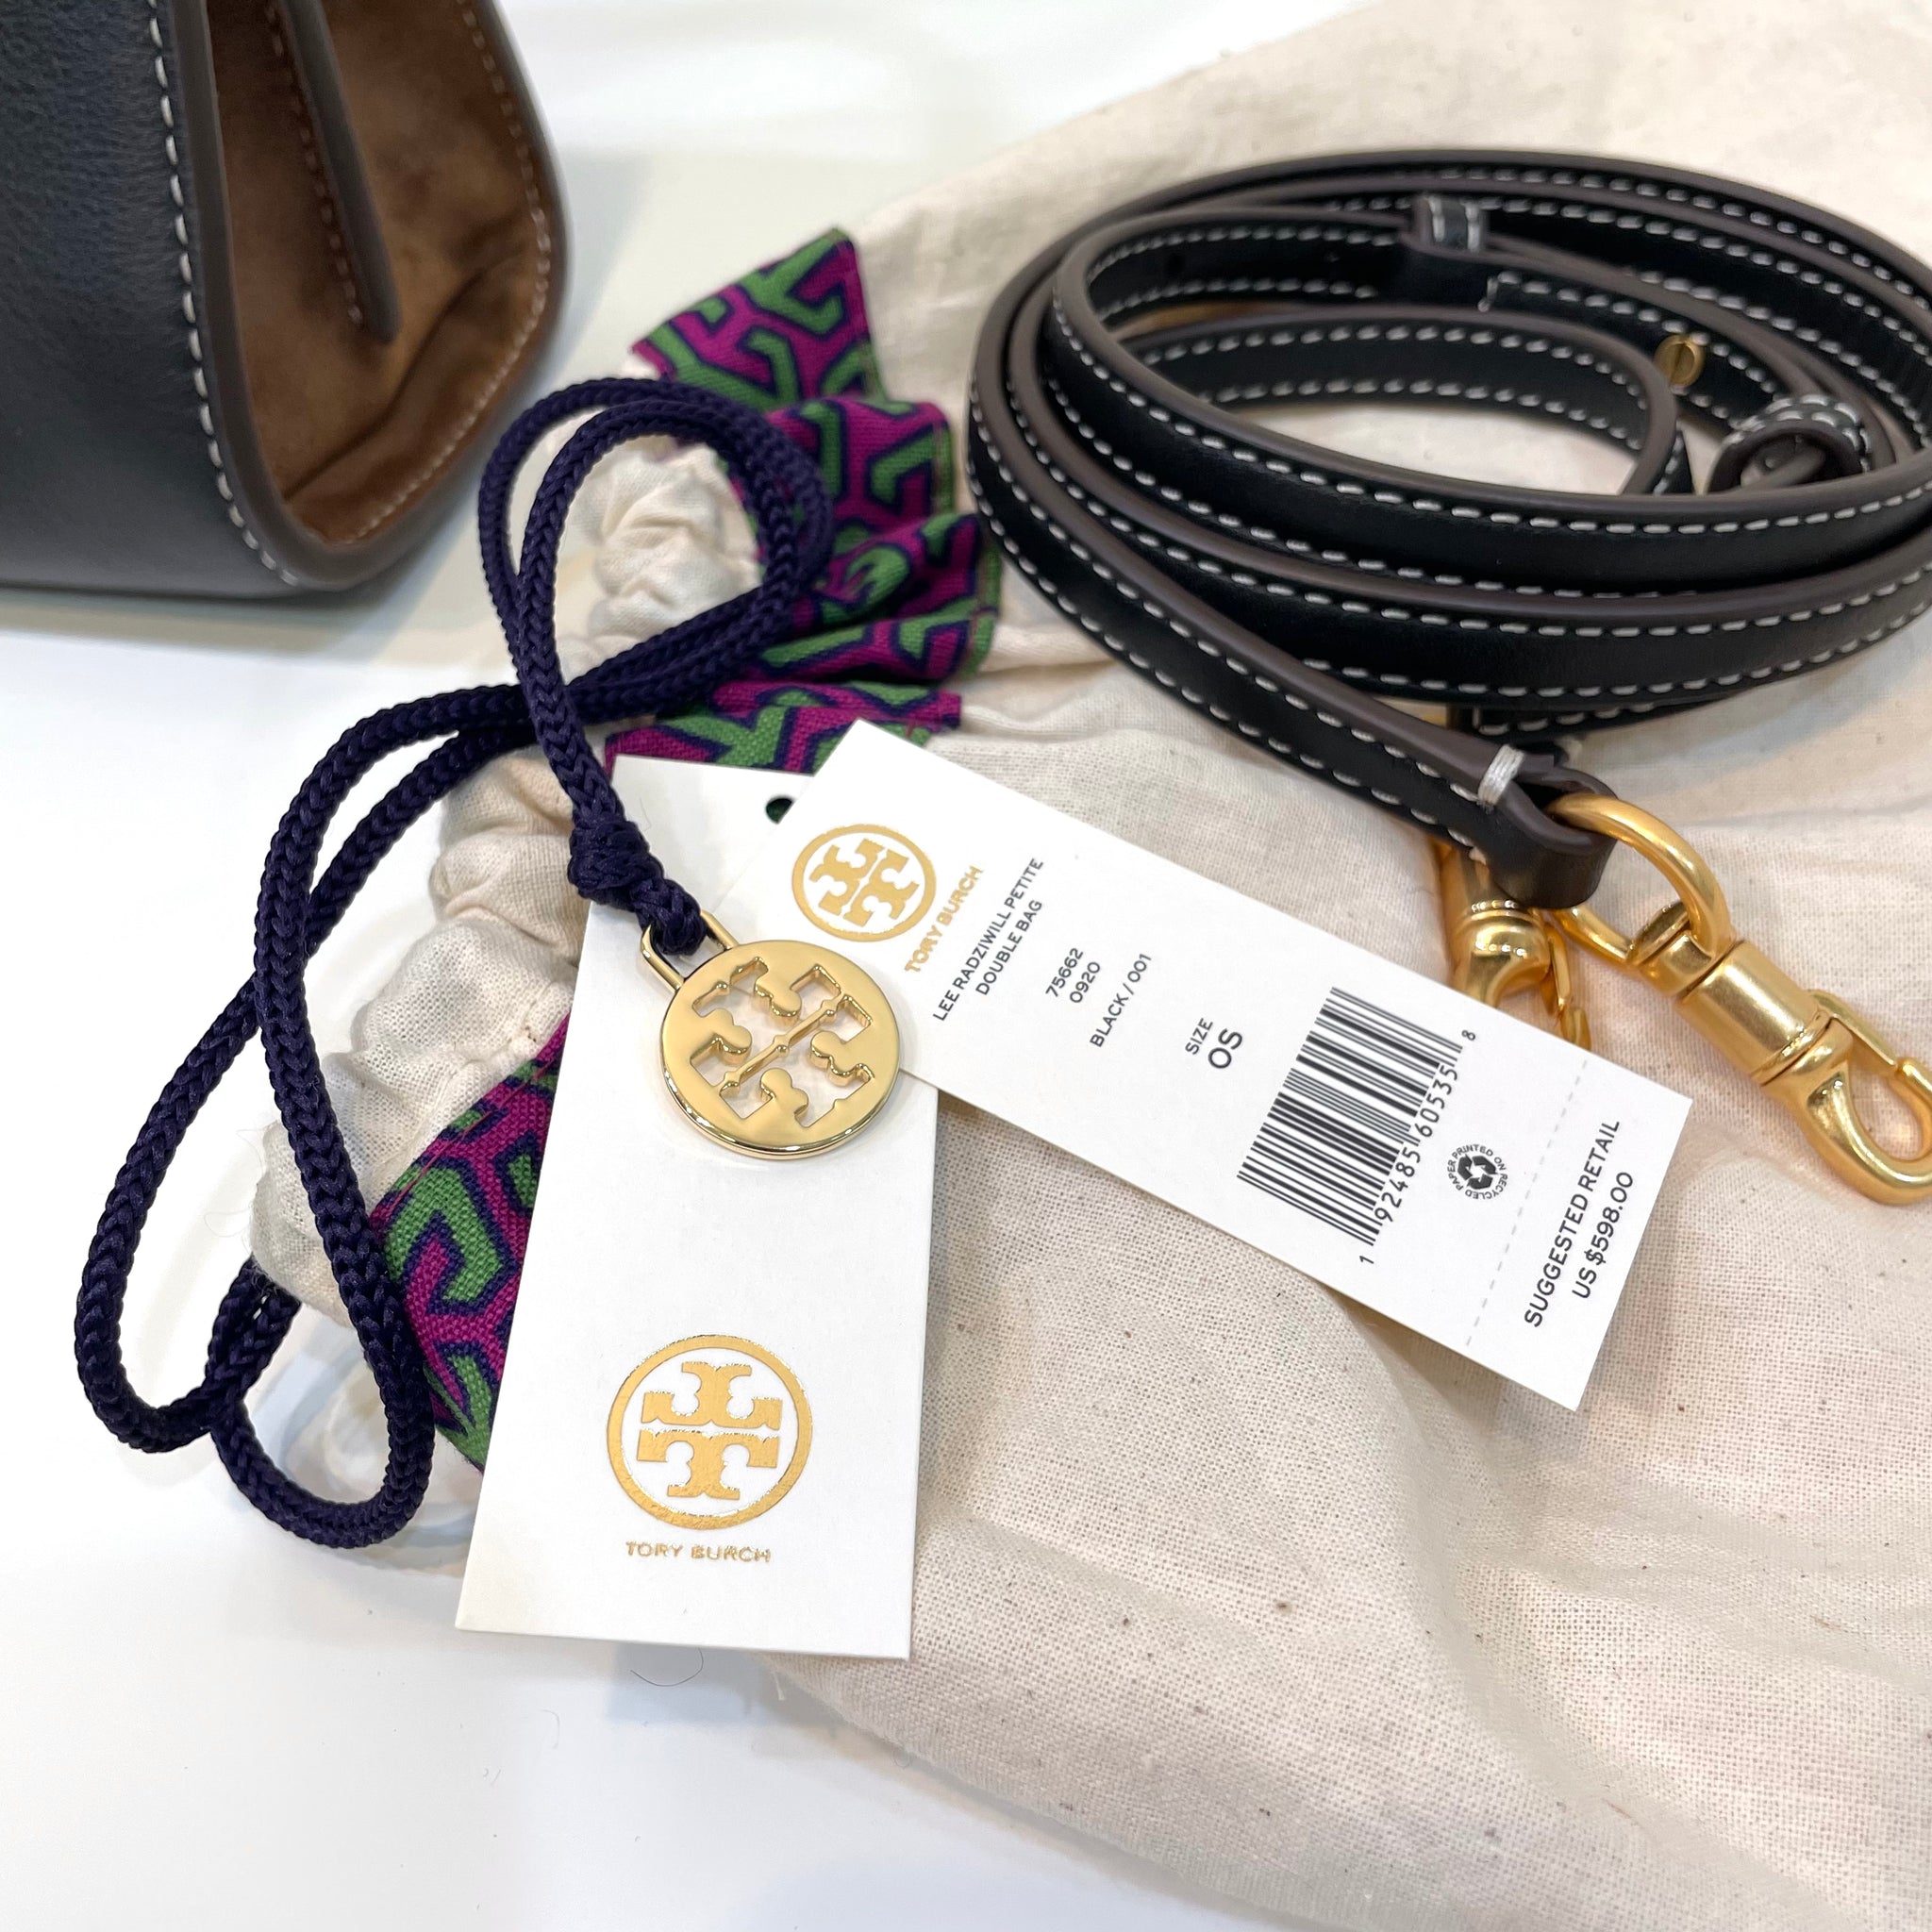 Tory Burch Lee Radziwill Petite Double Satchel Leather Bag in Black & –  Farewell Exchange